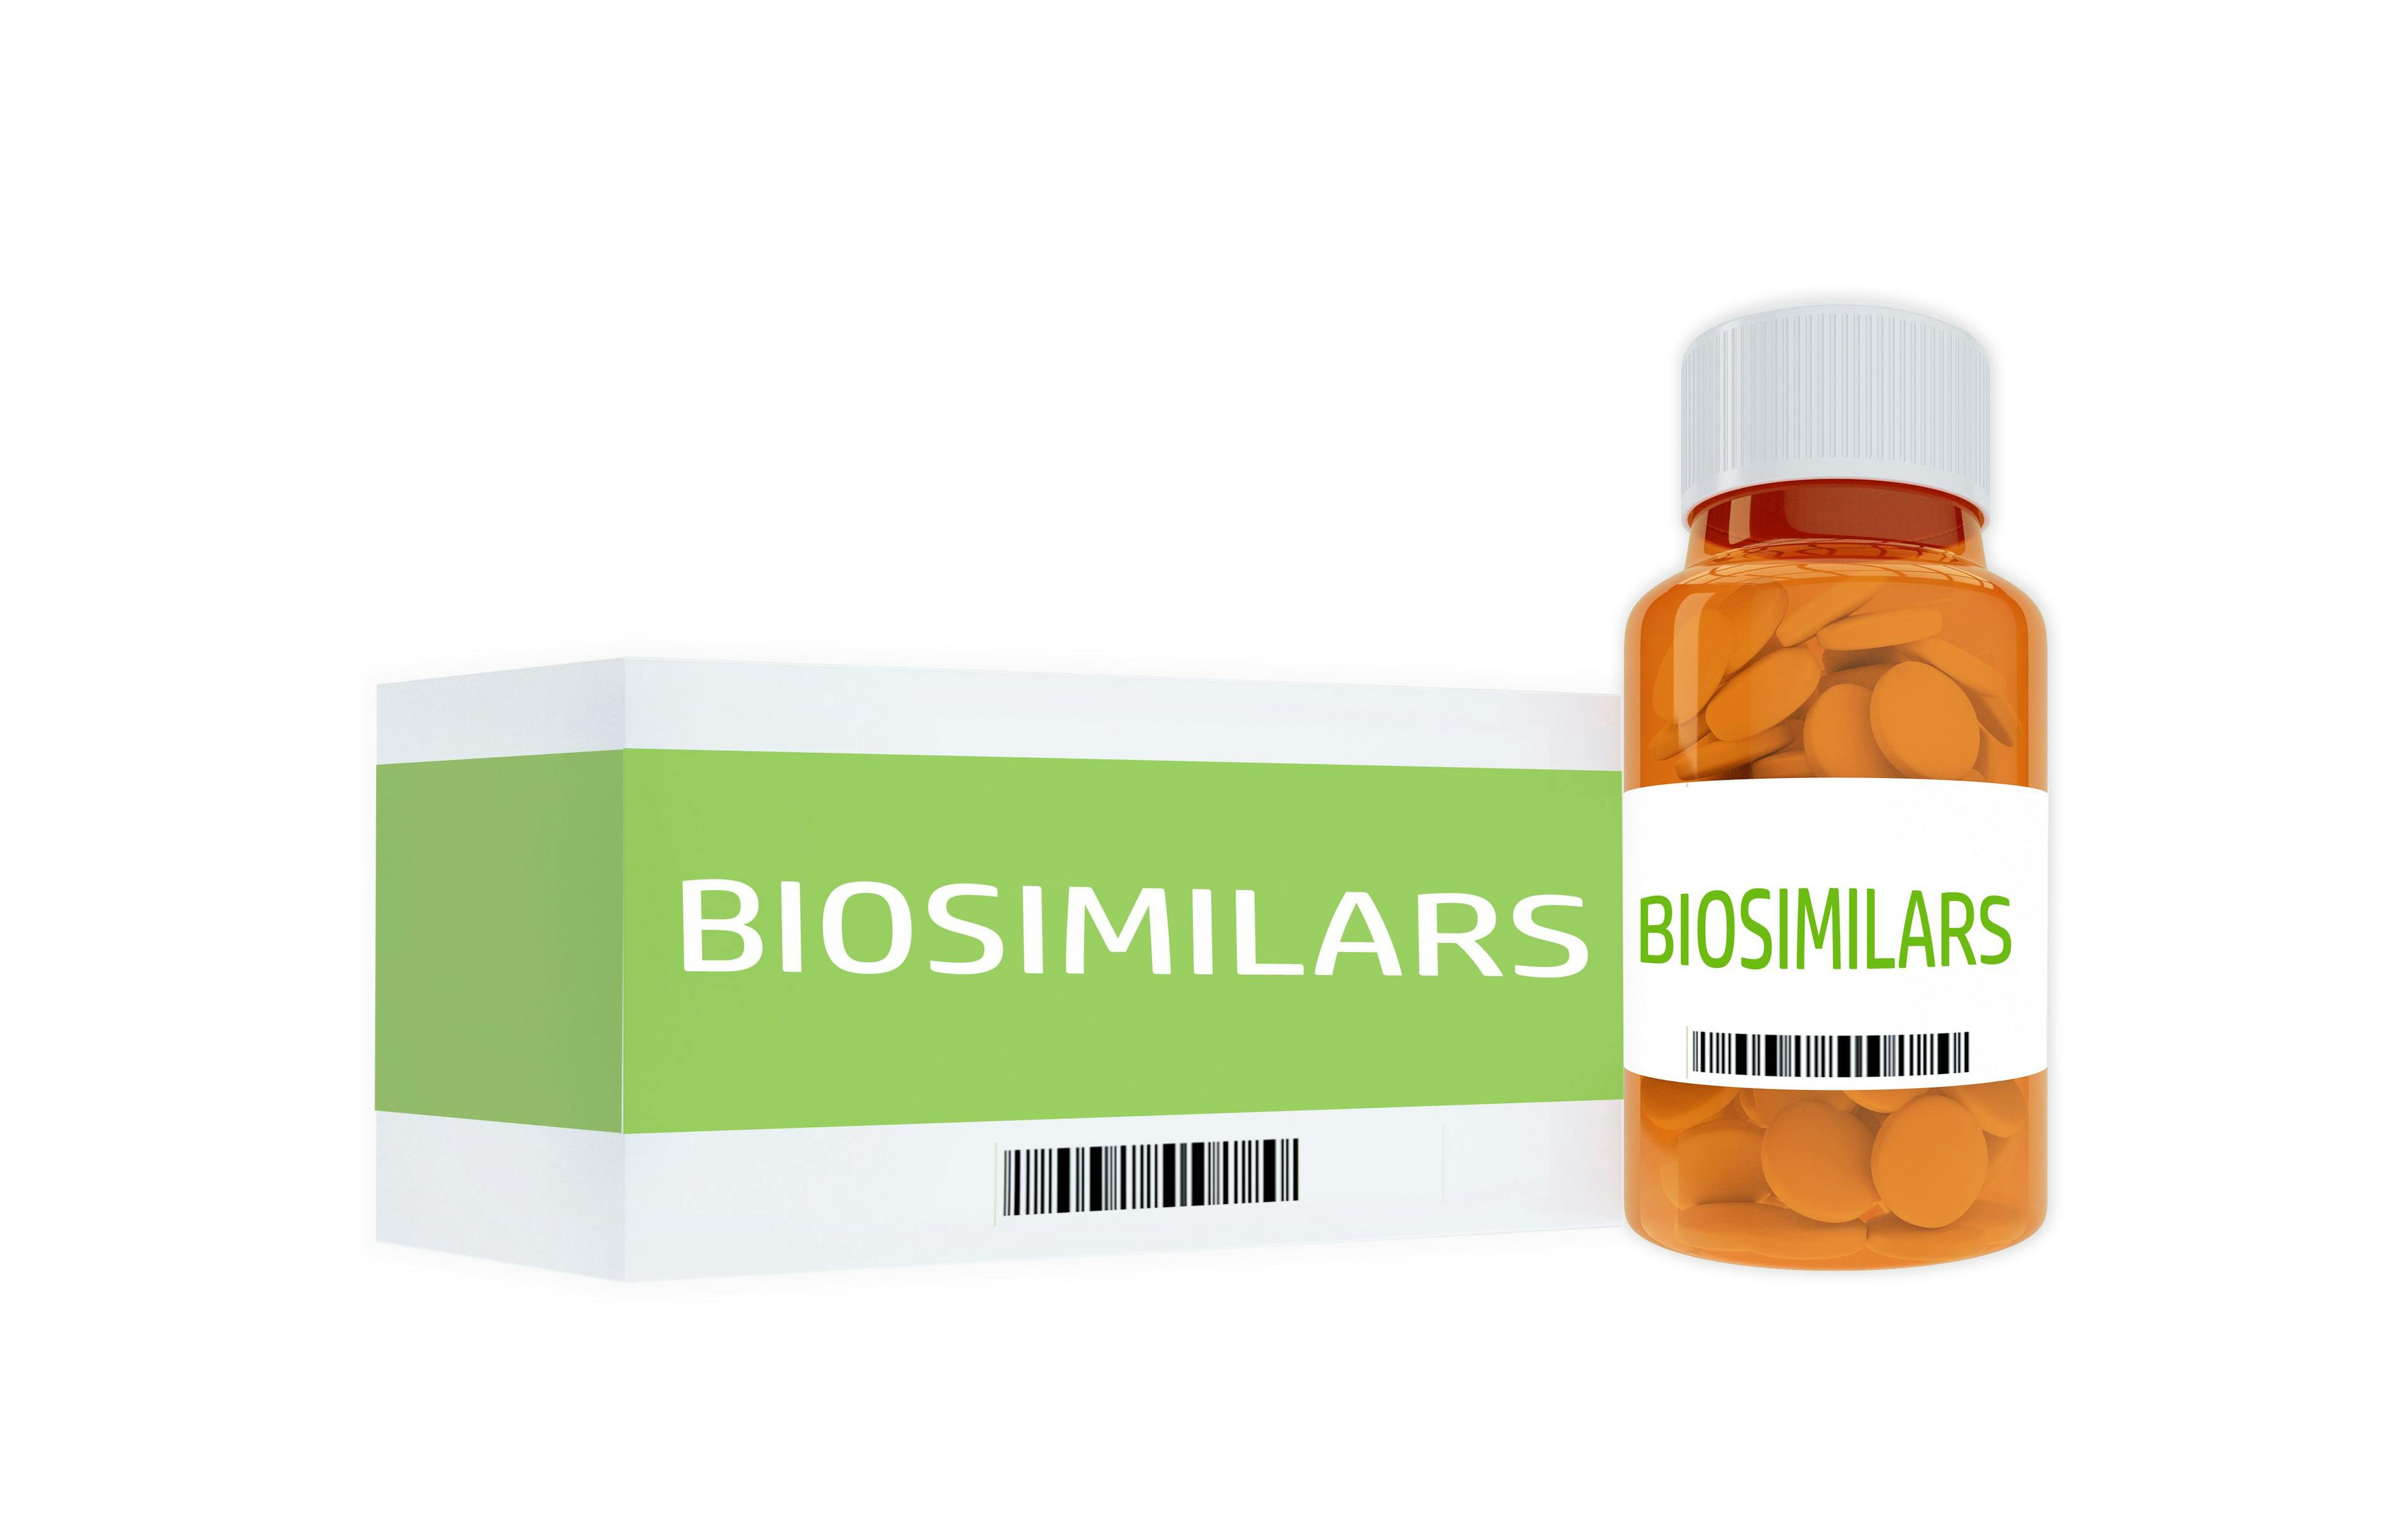 Patient, Provider Support is Key for Biosimilar Adoption| 2023 PBM I Annual National Conference